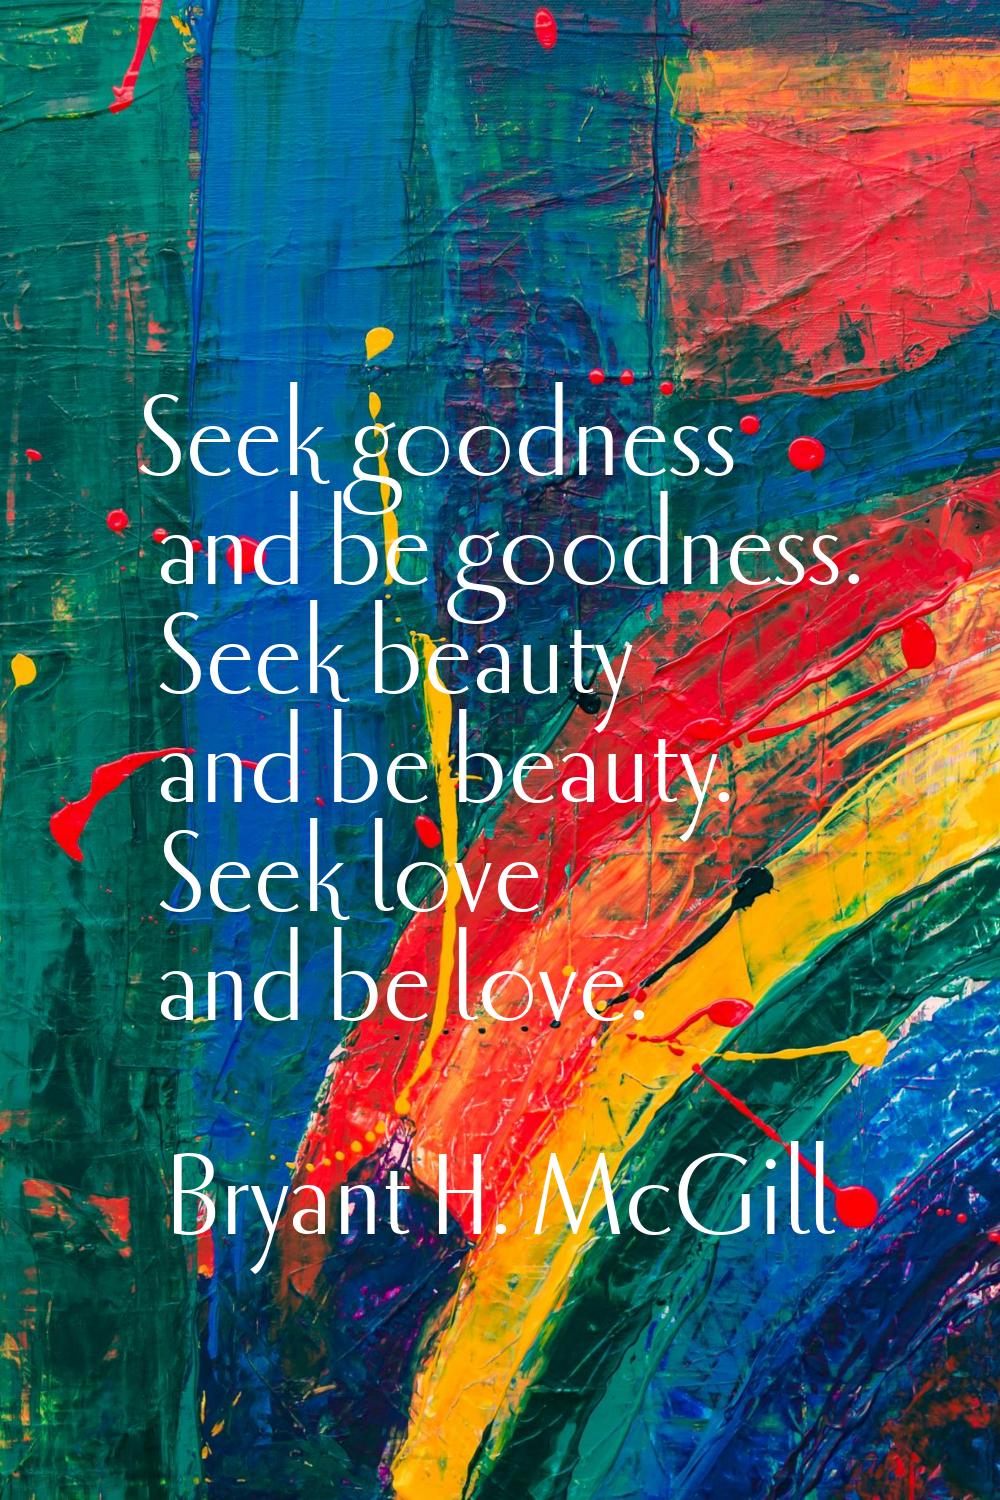 Seek goodness and be goodness. Seek beauty and be beauty. Seek love and be love.